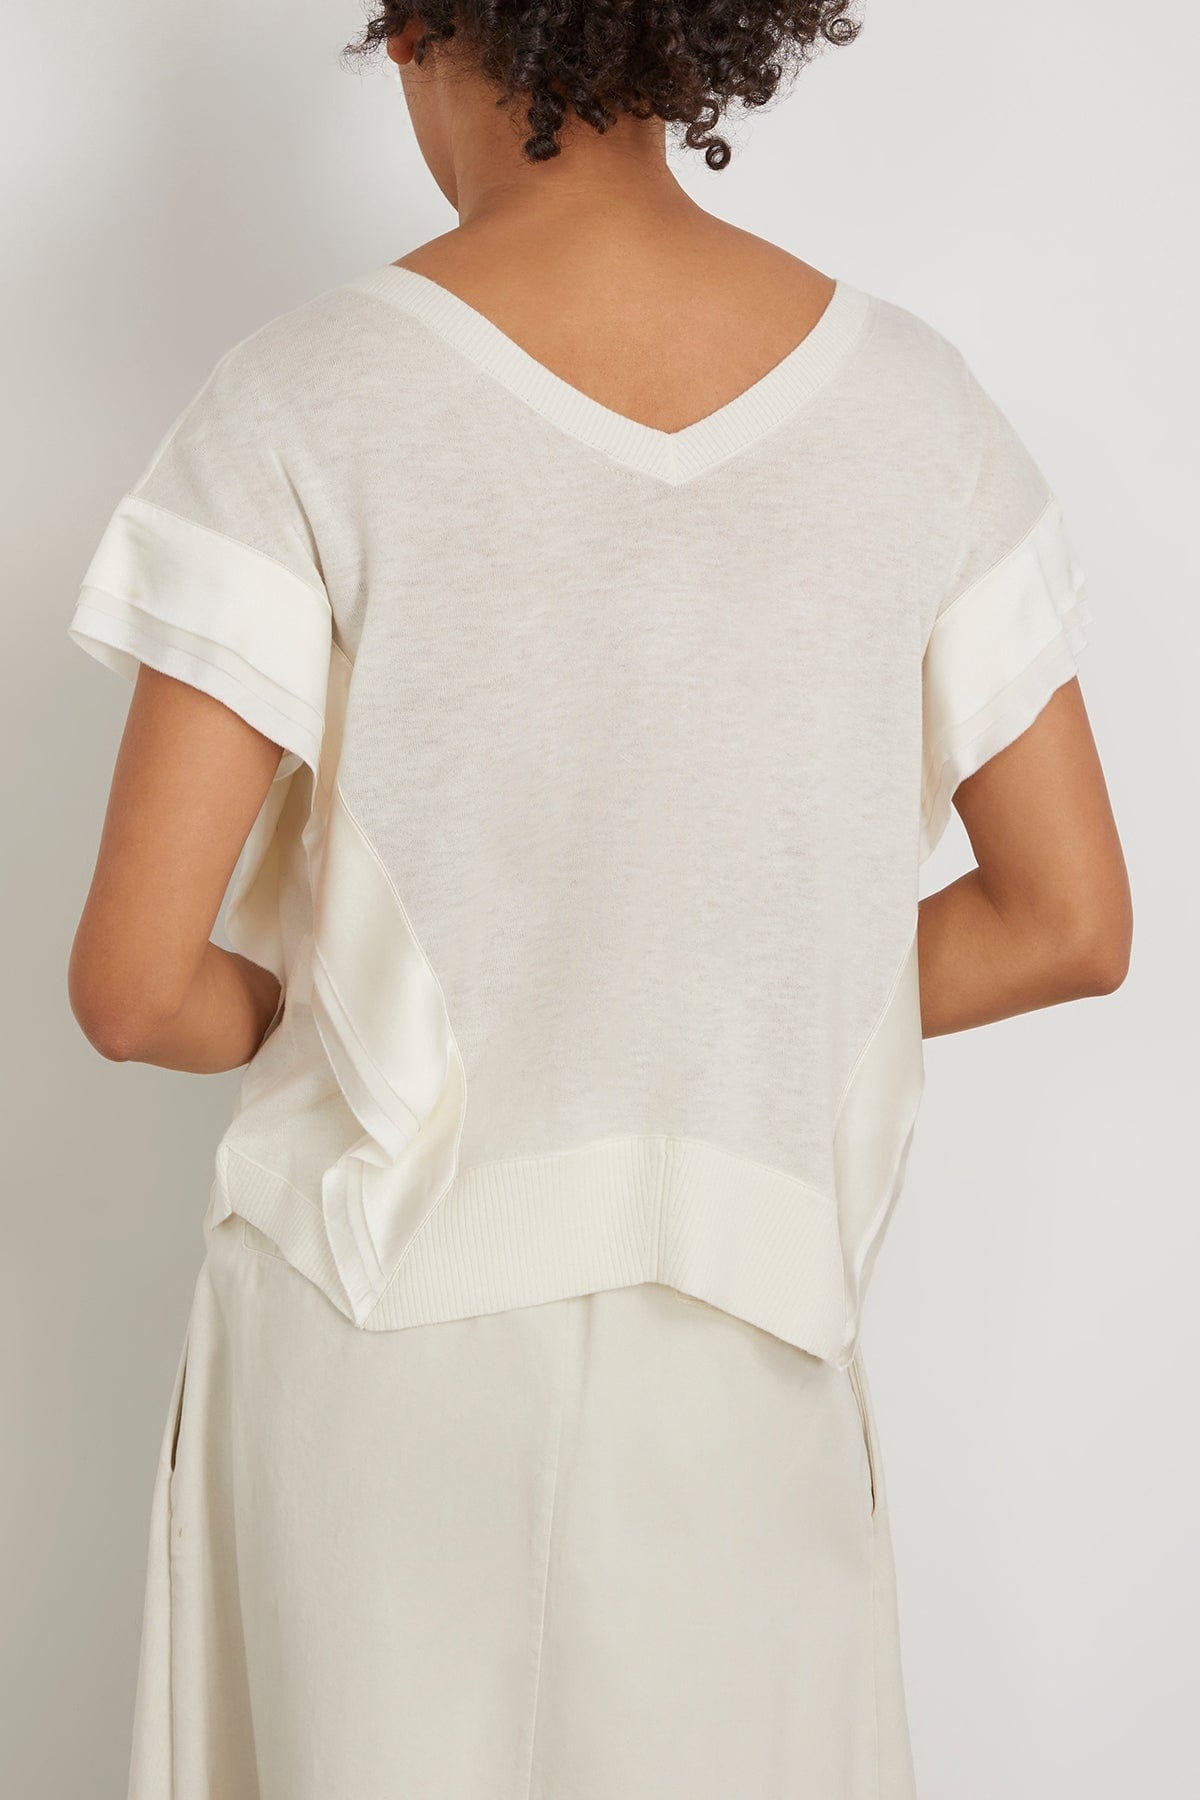 Delicate Statements Pullover in Shaded White - 4